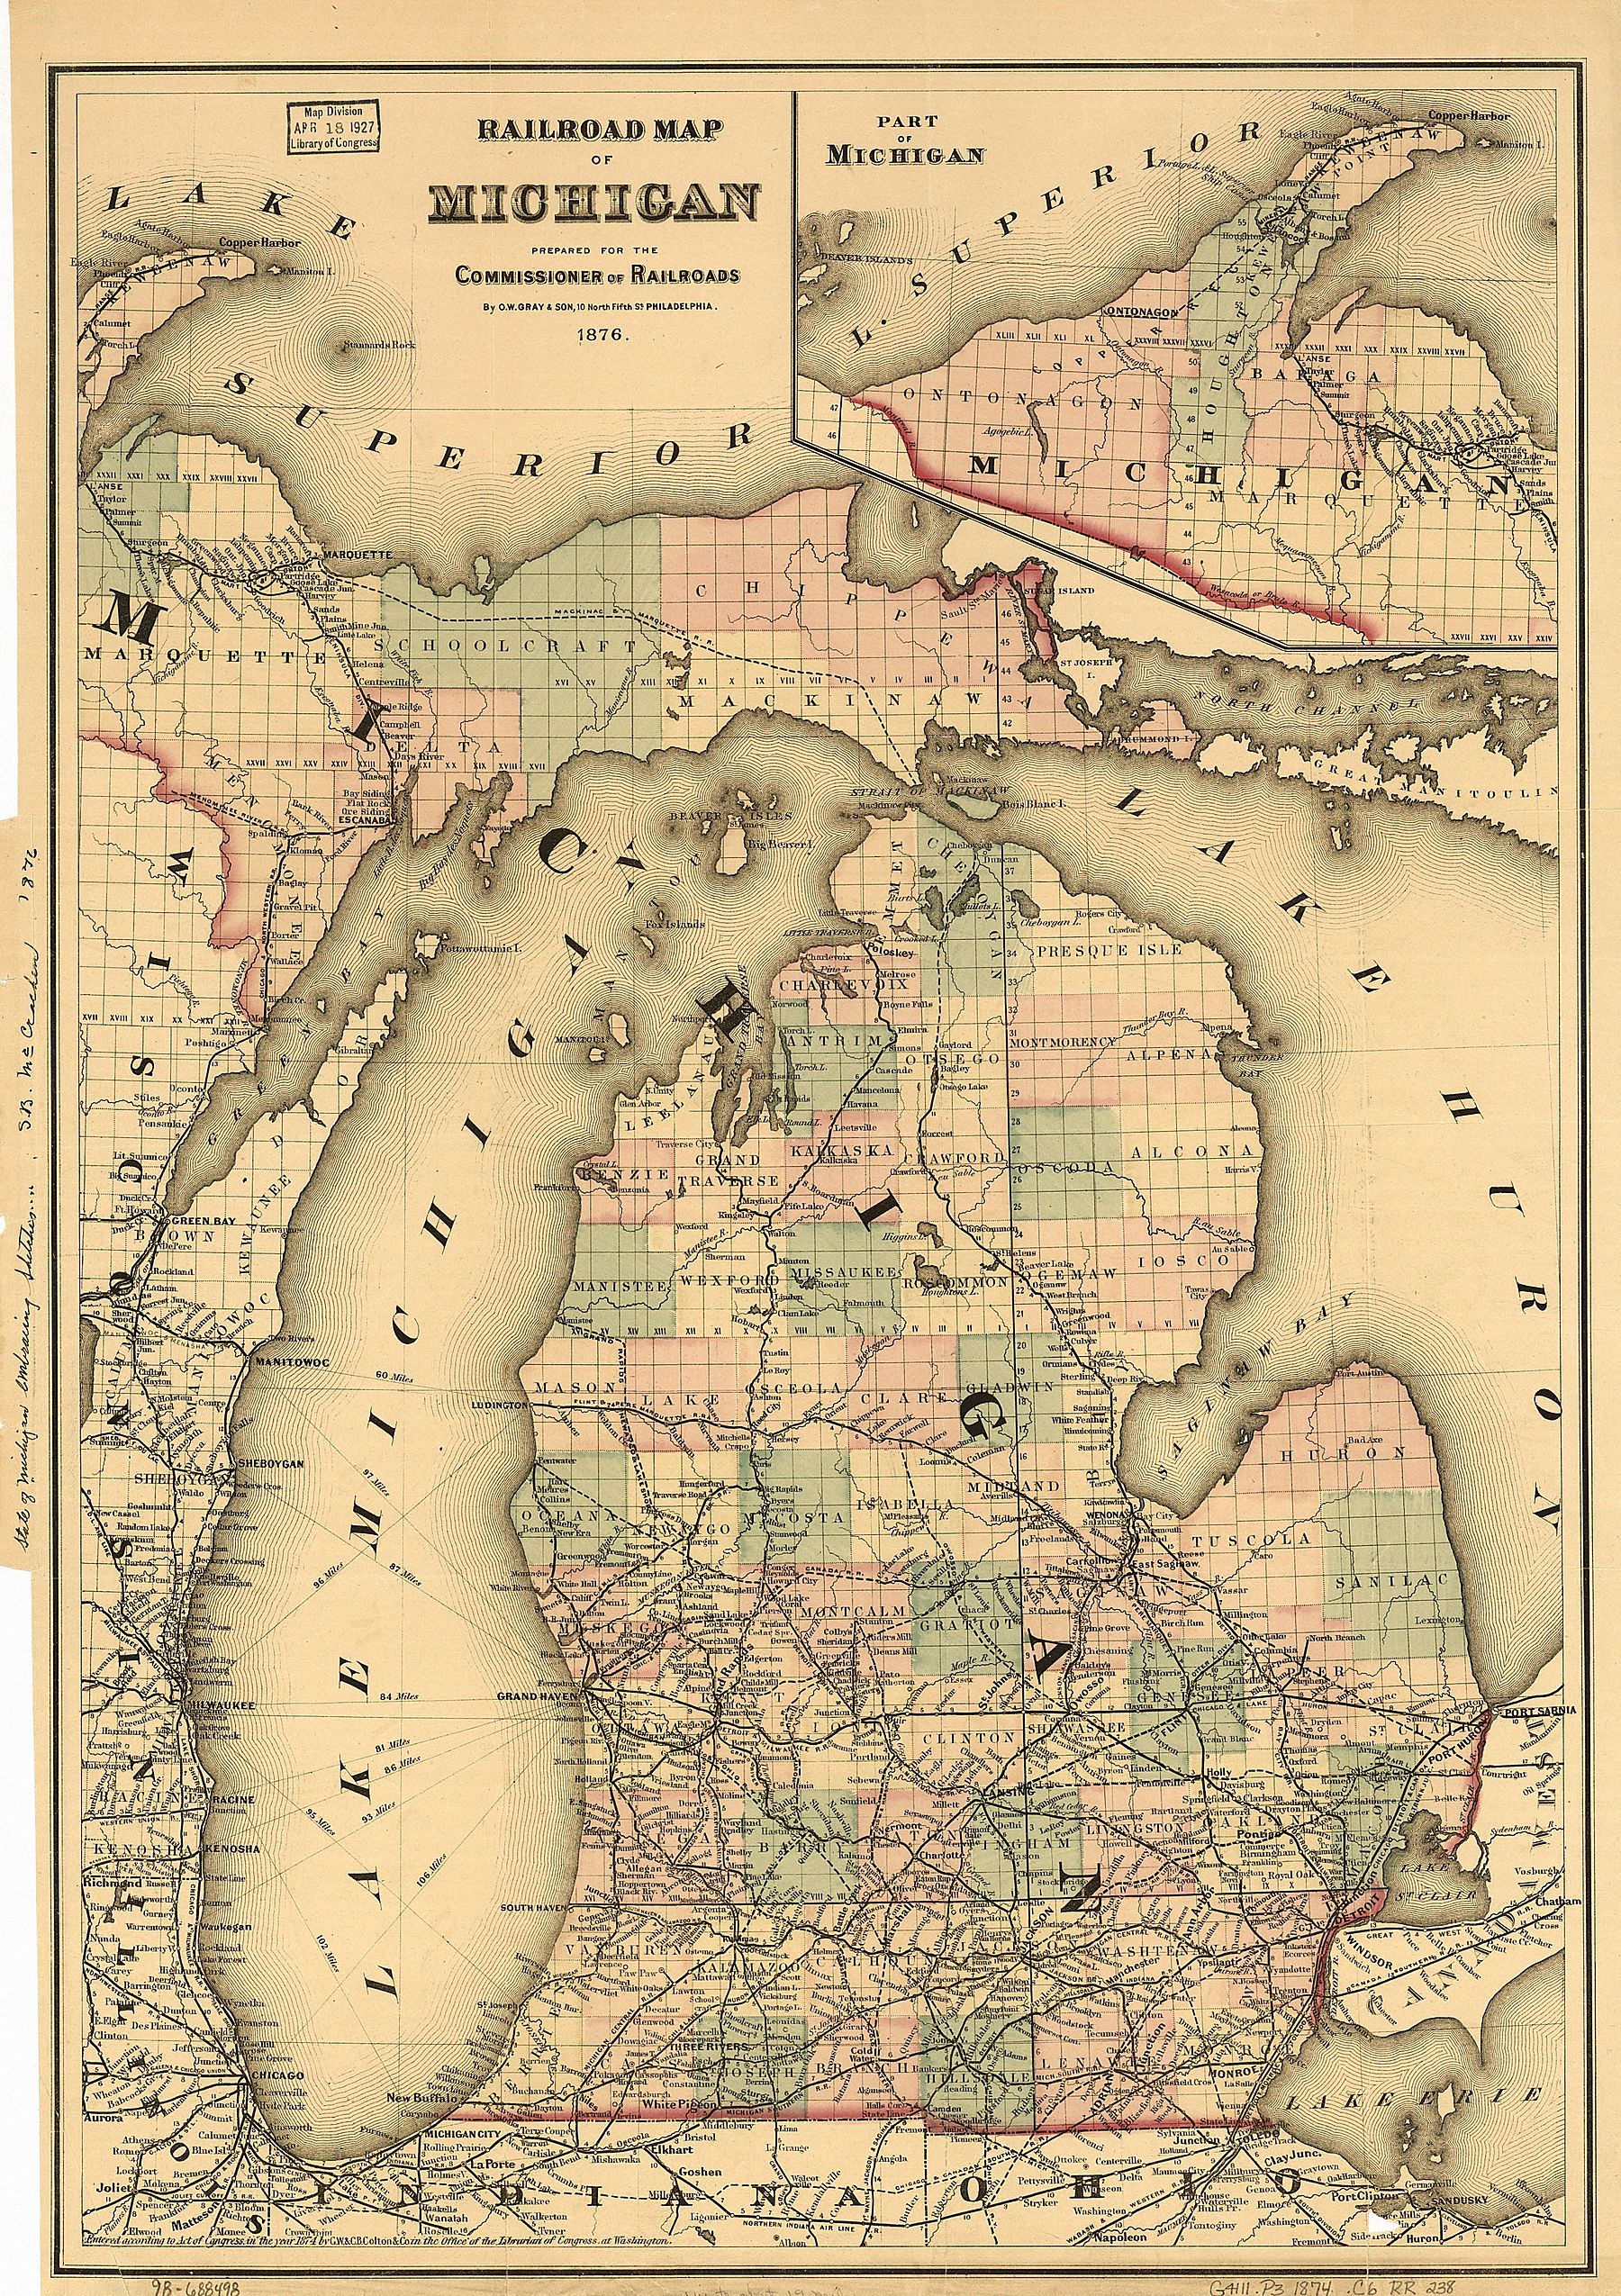 By 1876, the Grand Rapids and Indiana Railroad had built a line north to Petoskey with stops in Boyne Falls and Melrose. This link to cities in lower Michigan brought increased population to Charlevoix County, and new political power to the eastern part of the county.